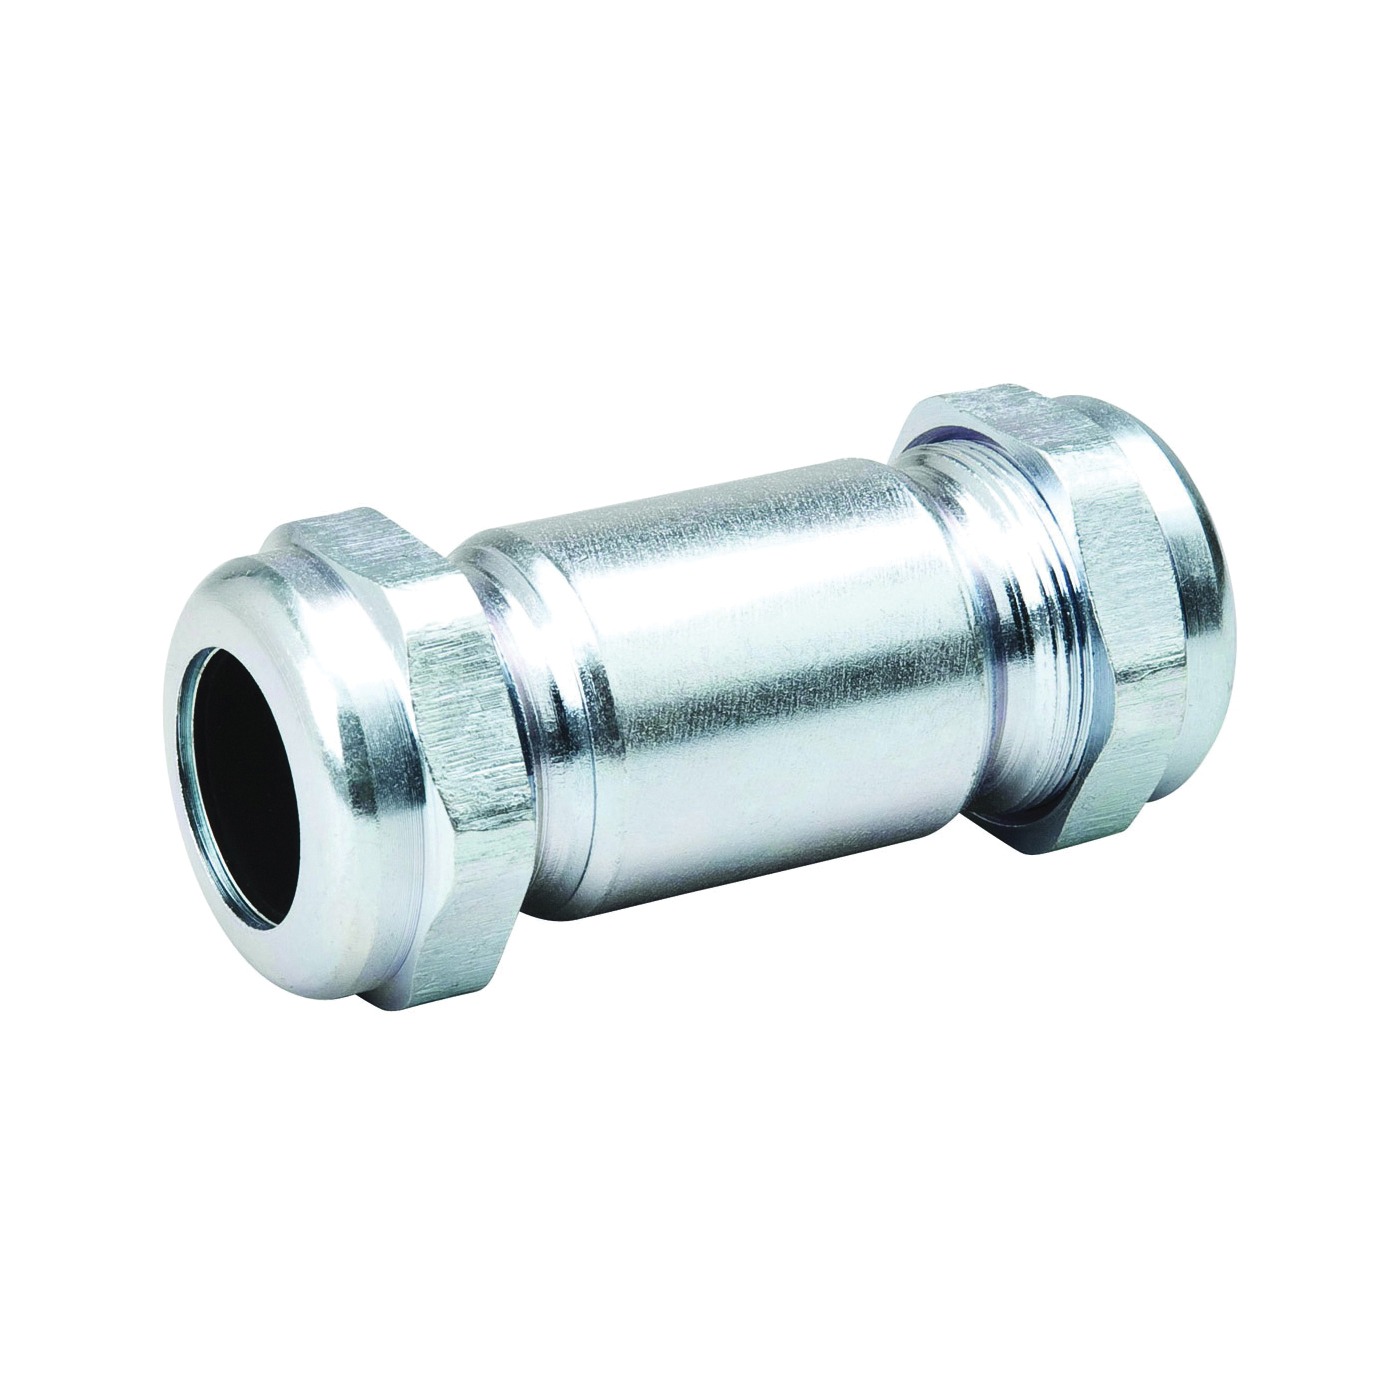 160-006HC Pipe Coupling, 1-1/4 in, Compression x IPS, 125 psi Pressure